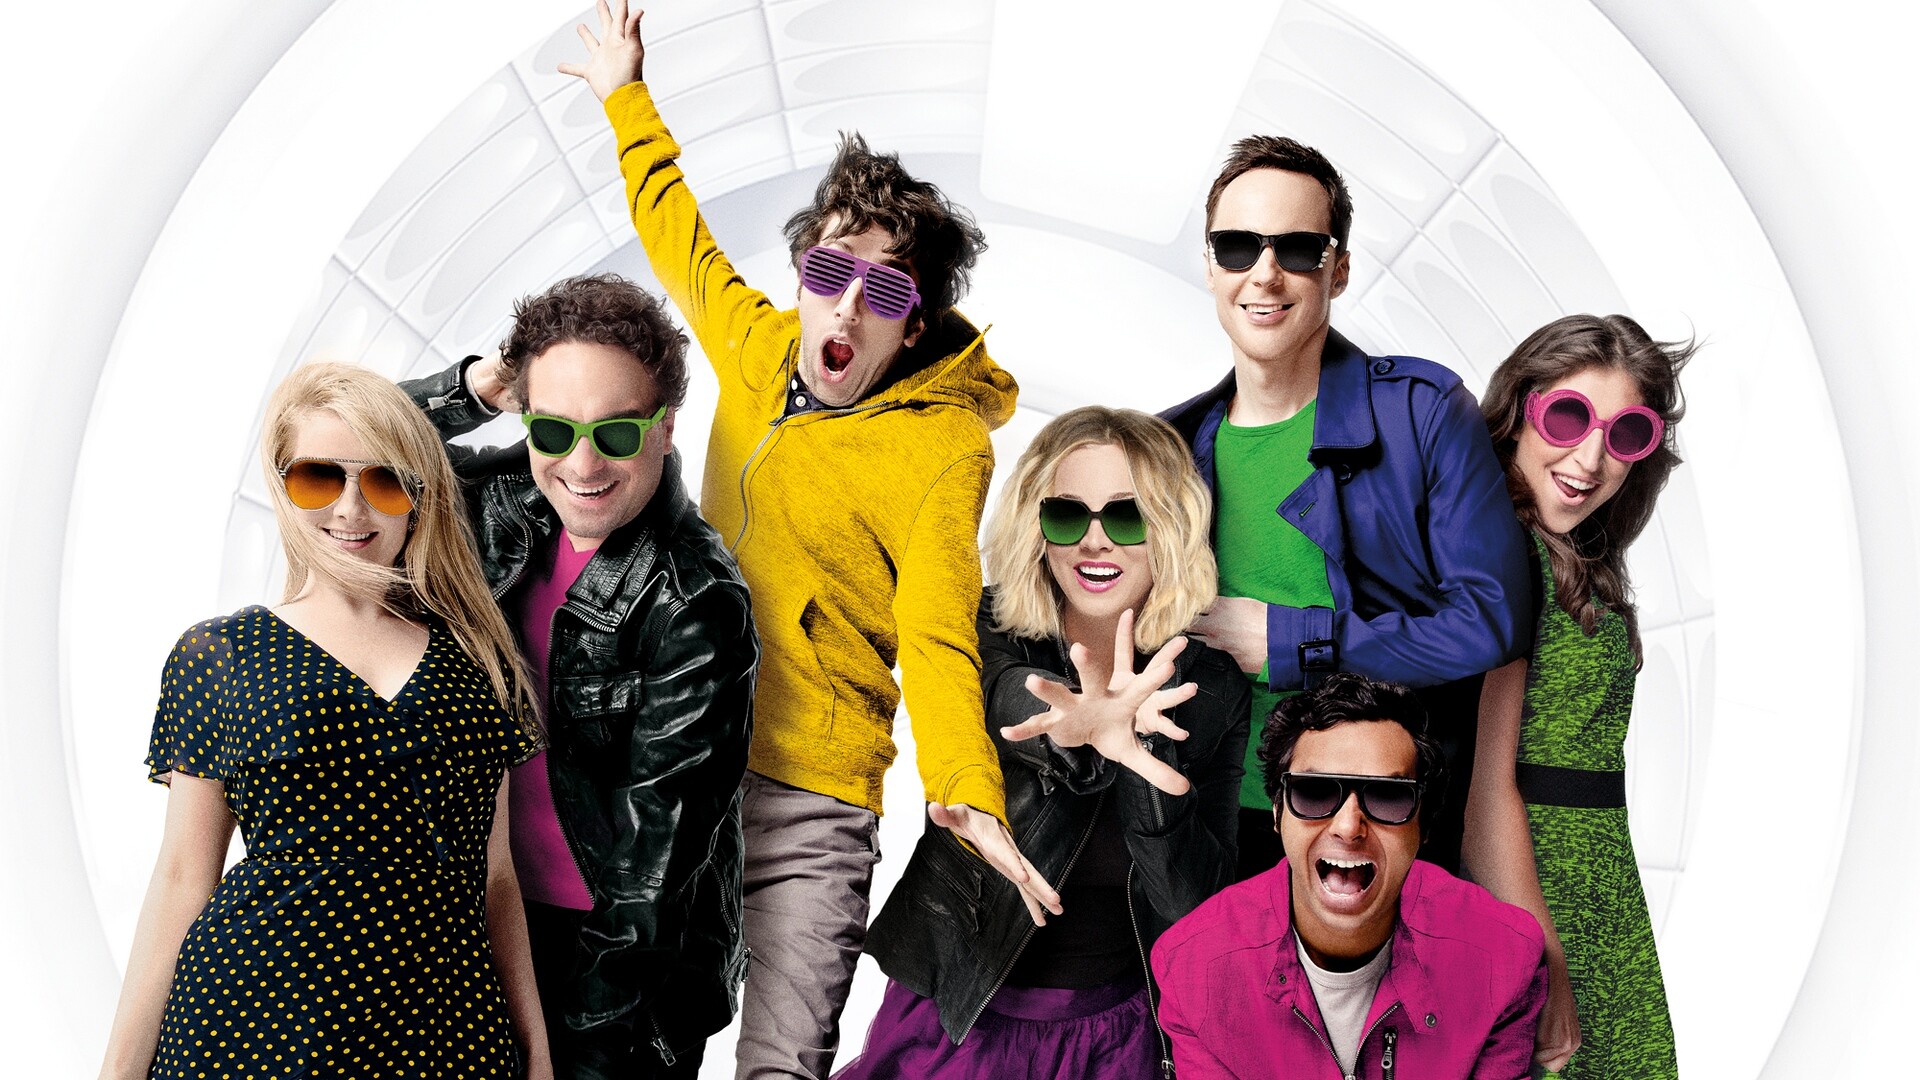 The Big Bang Theory: The geeky group of Sheldon, Leonard, Howard, and Rajesh as they befriended aspiring actress Penny, and fellow scientists Bernadette and Amy. 1920x1080 Full HD Background.